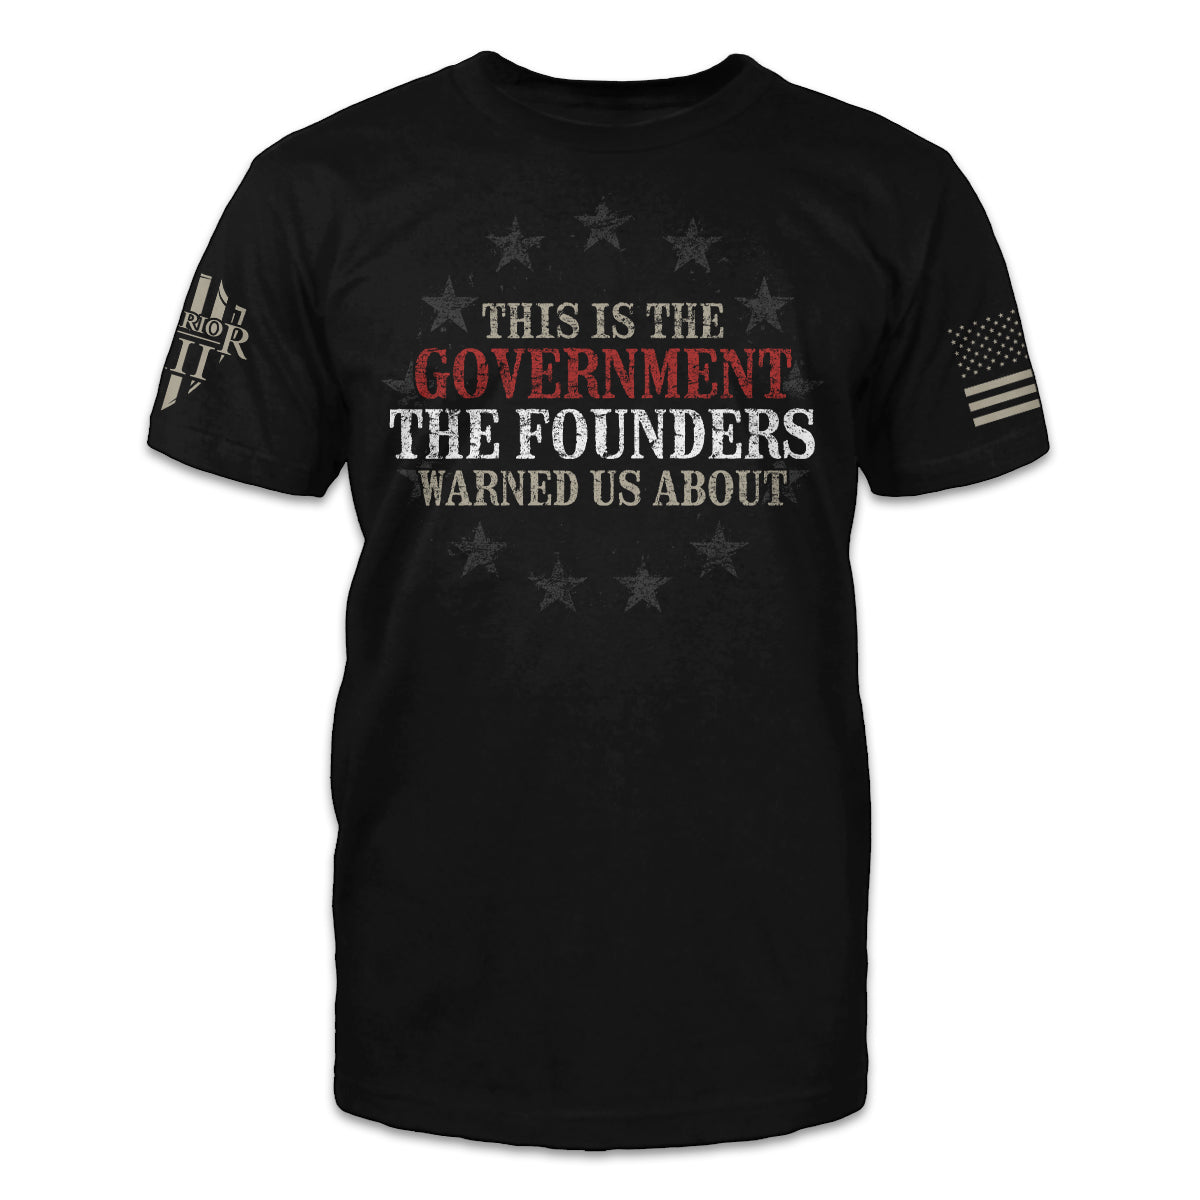 The Founders Warned Us